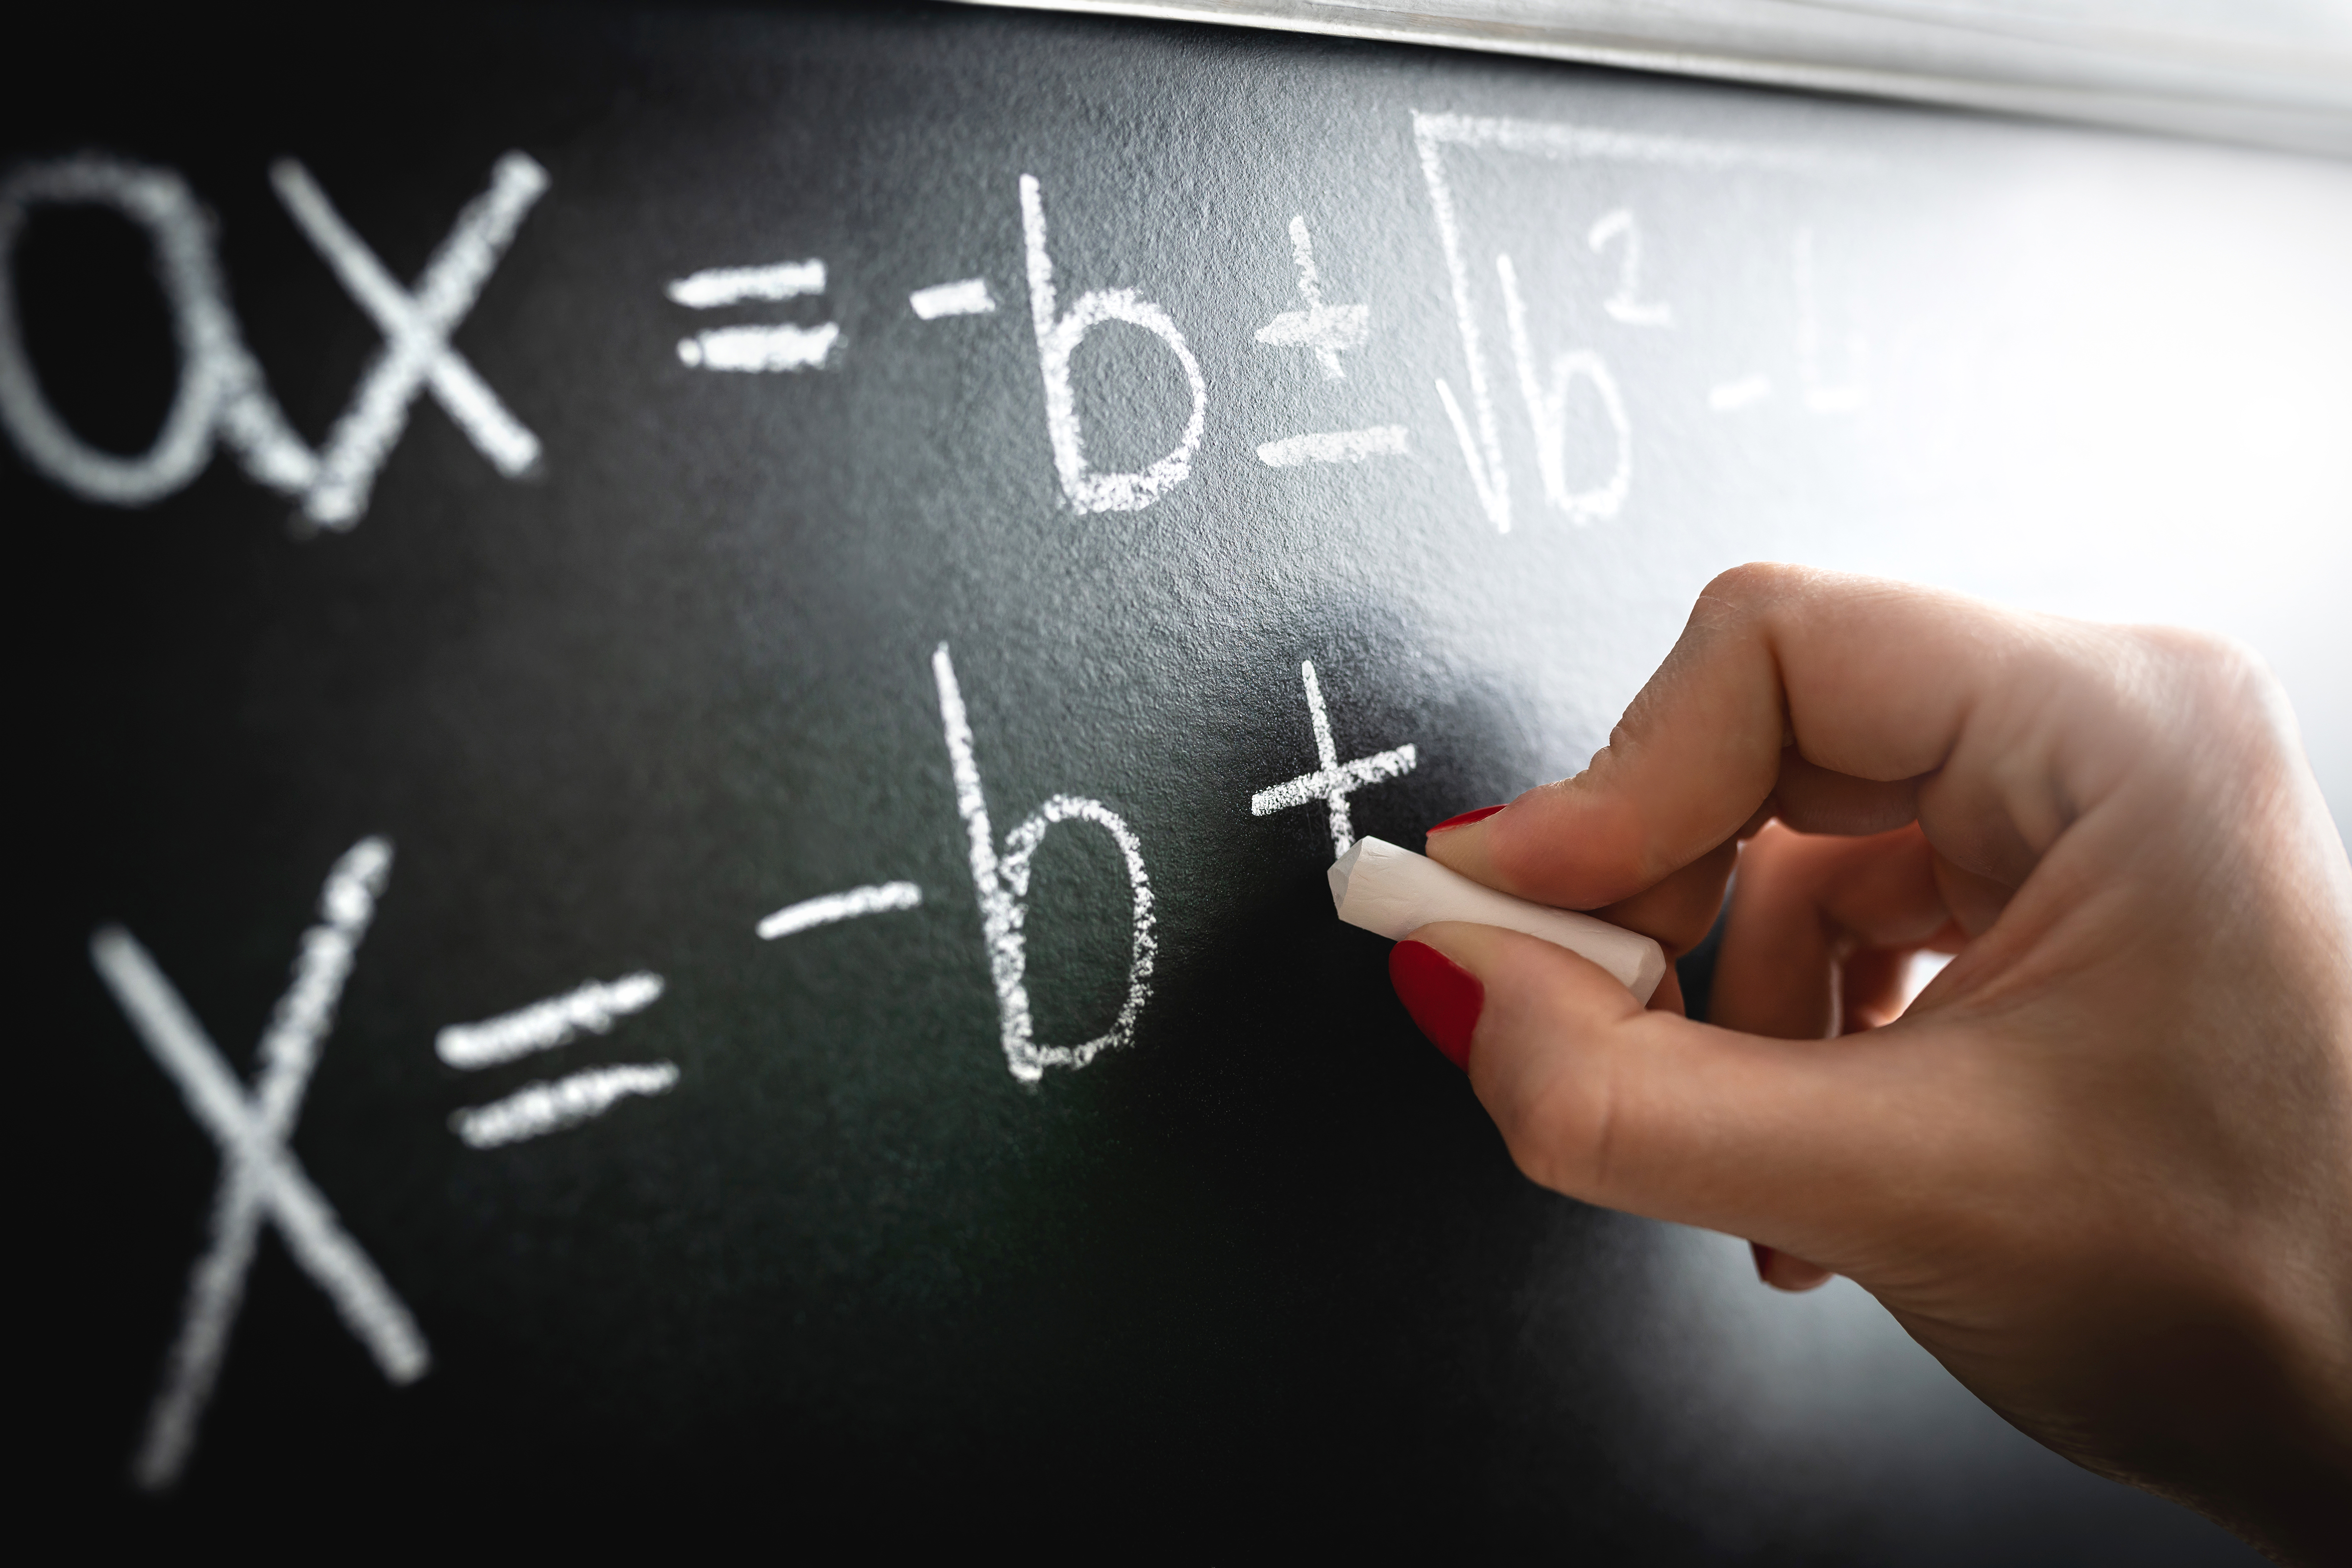 Math equation, function or calculation on chalkboard. Teacher writing on blackboard during lesson and lecture in school classroom. Student or tutor calculating or professor working.